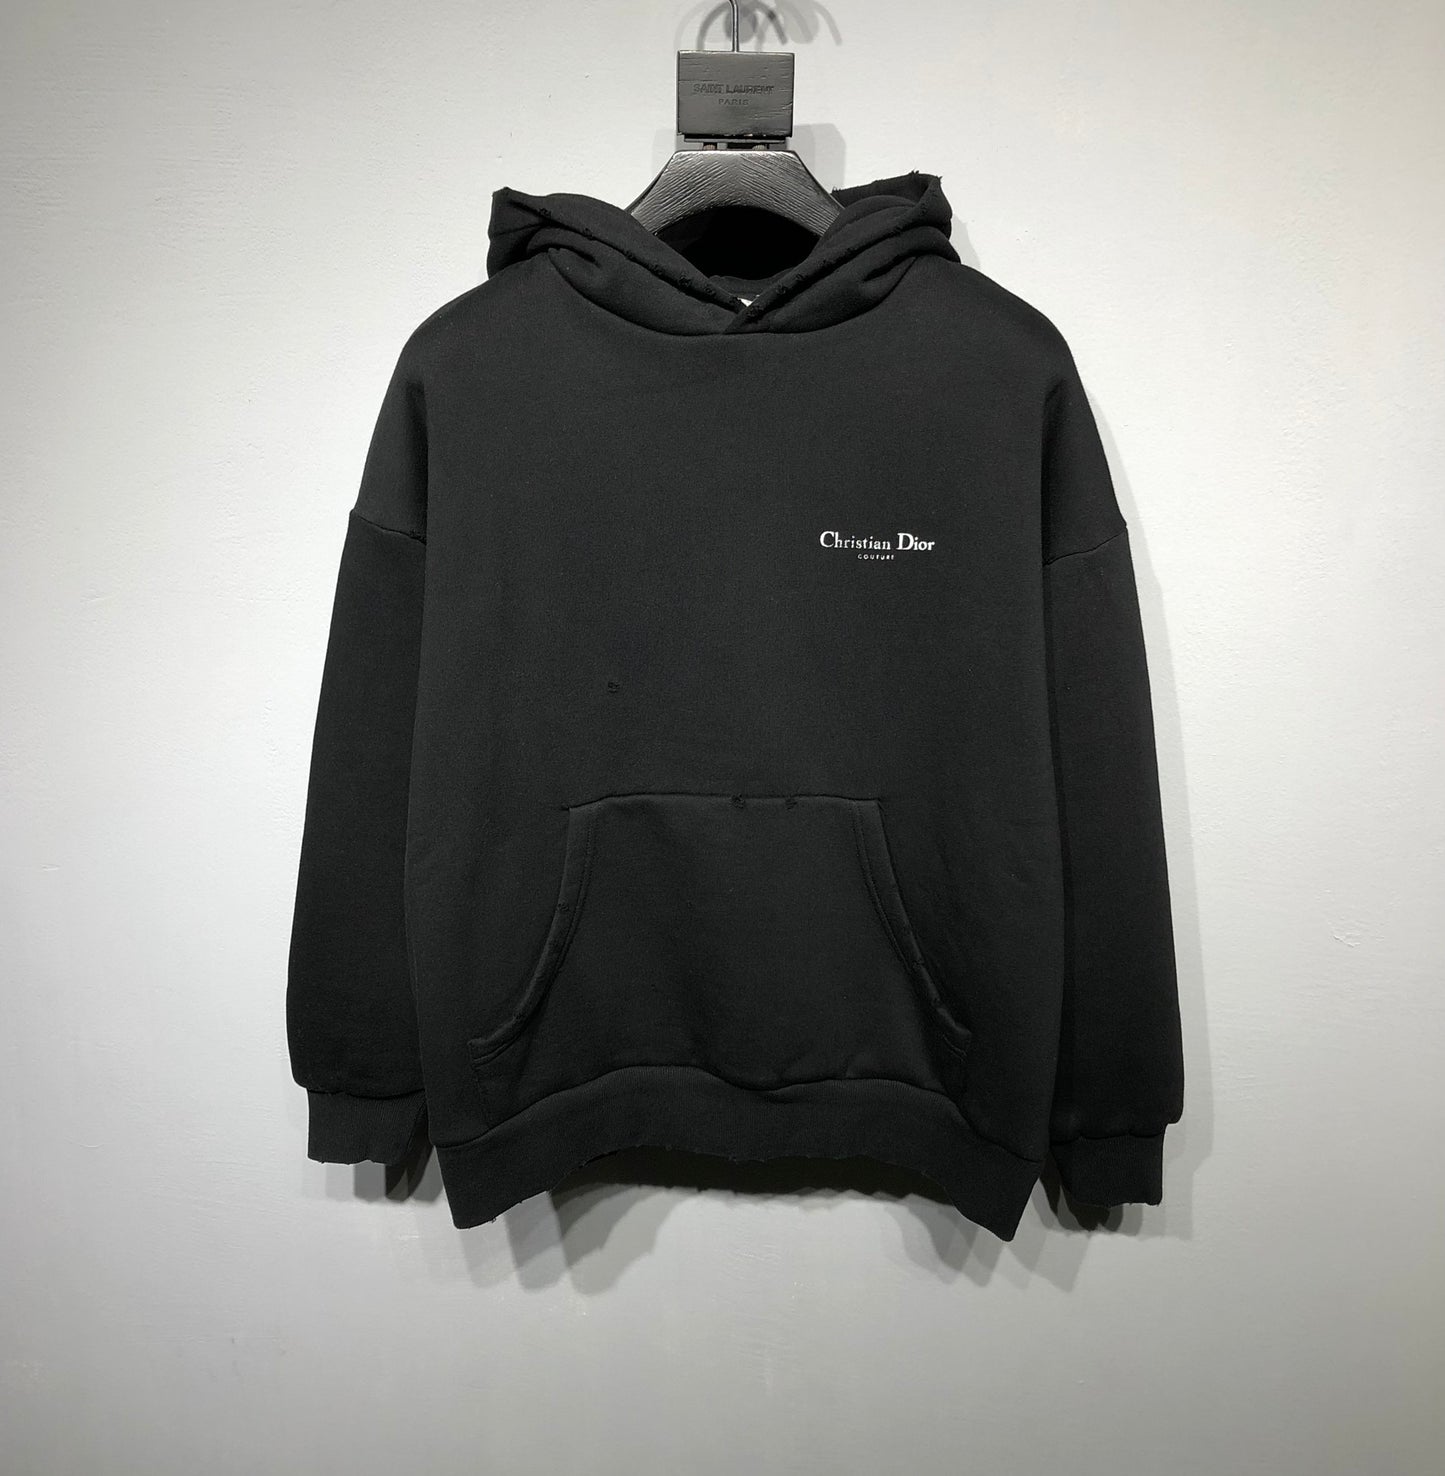 CHRISTIAN DIOR COUTURE HOODED SWEATSHIRT